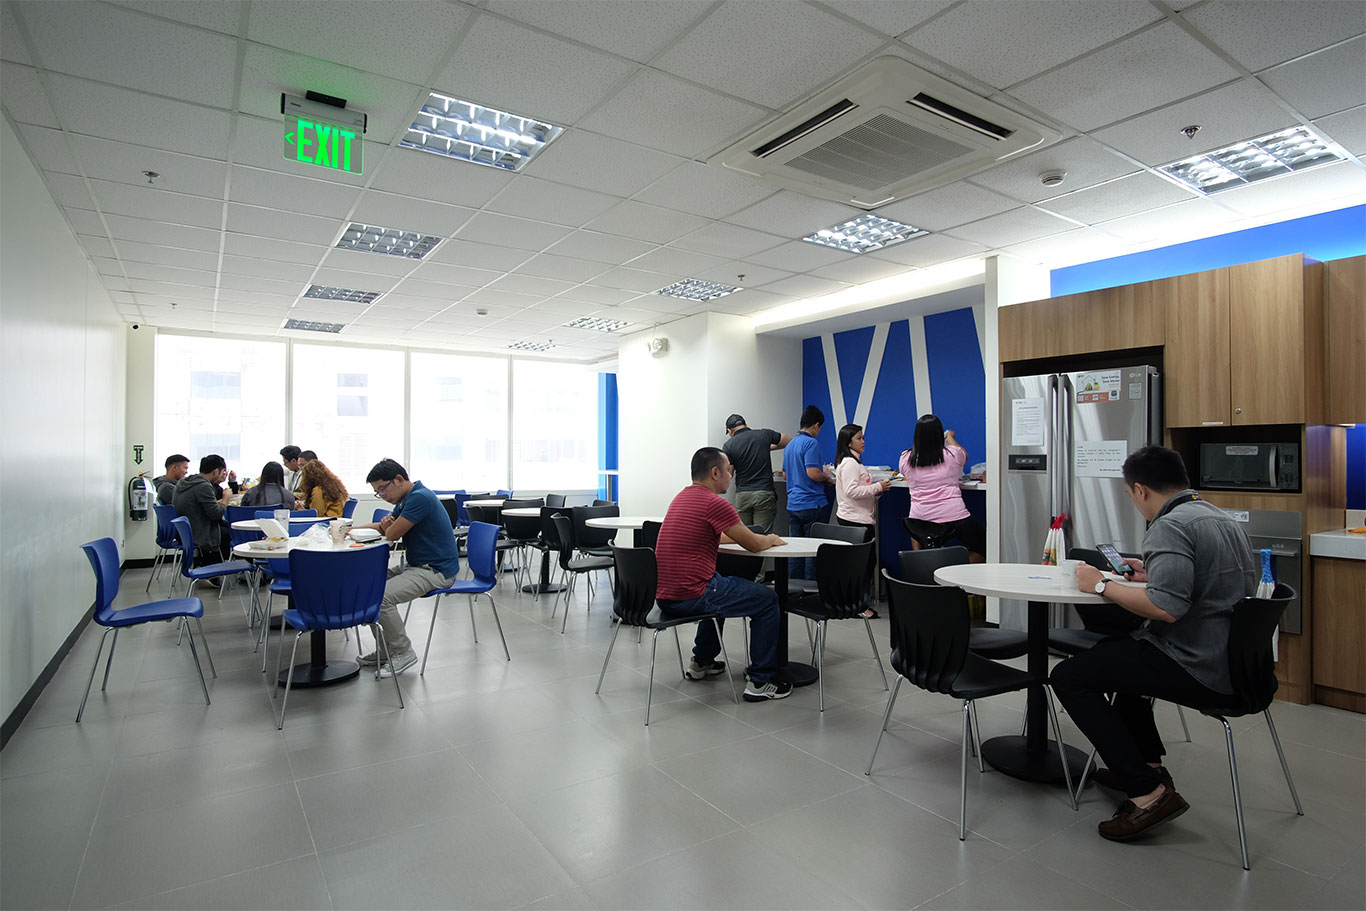 KMC Serviced Office for rent in BGC, SM Aura Facility Pantry Area - EpicSpace